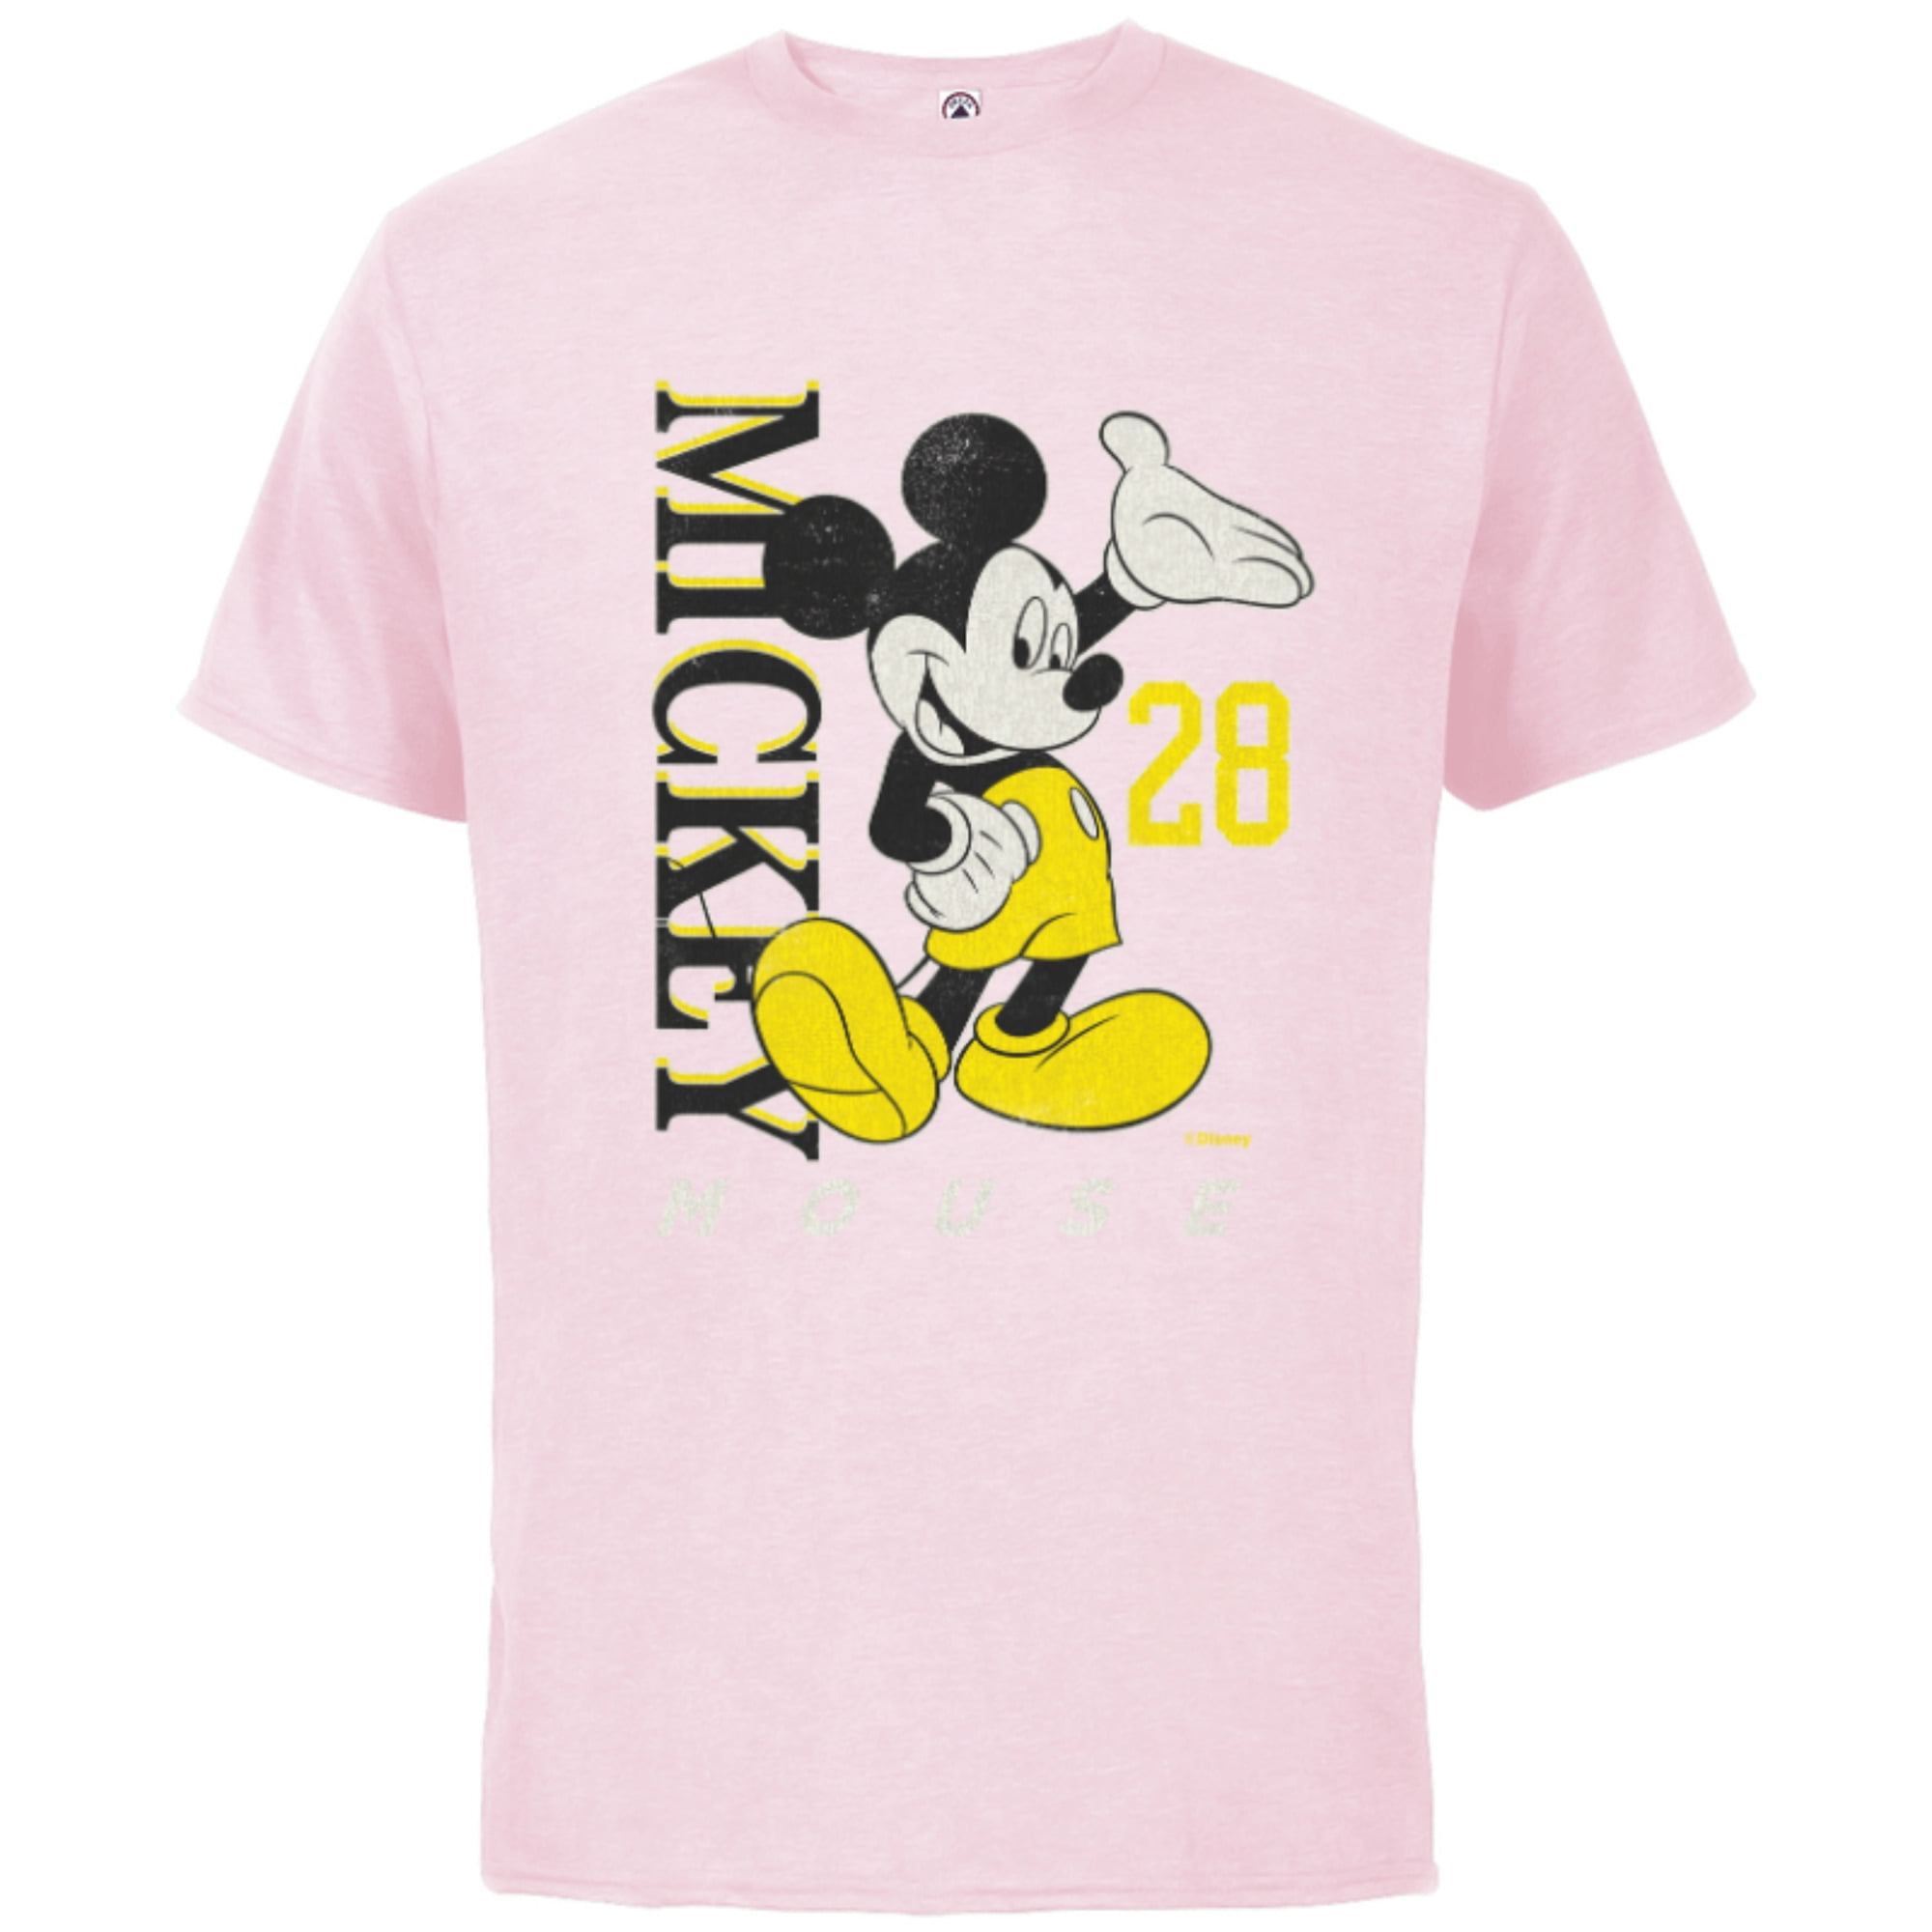 Disney Mickey Mouse Vintage Classics 28 Black & Yellow - Short Sleeve  Cotton T-Shirt for Adults - Customized-Black